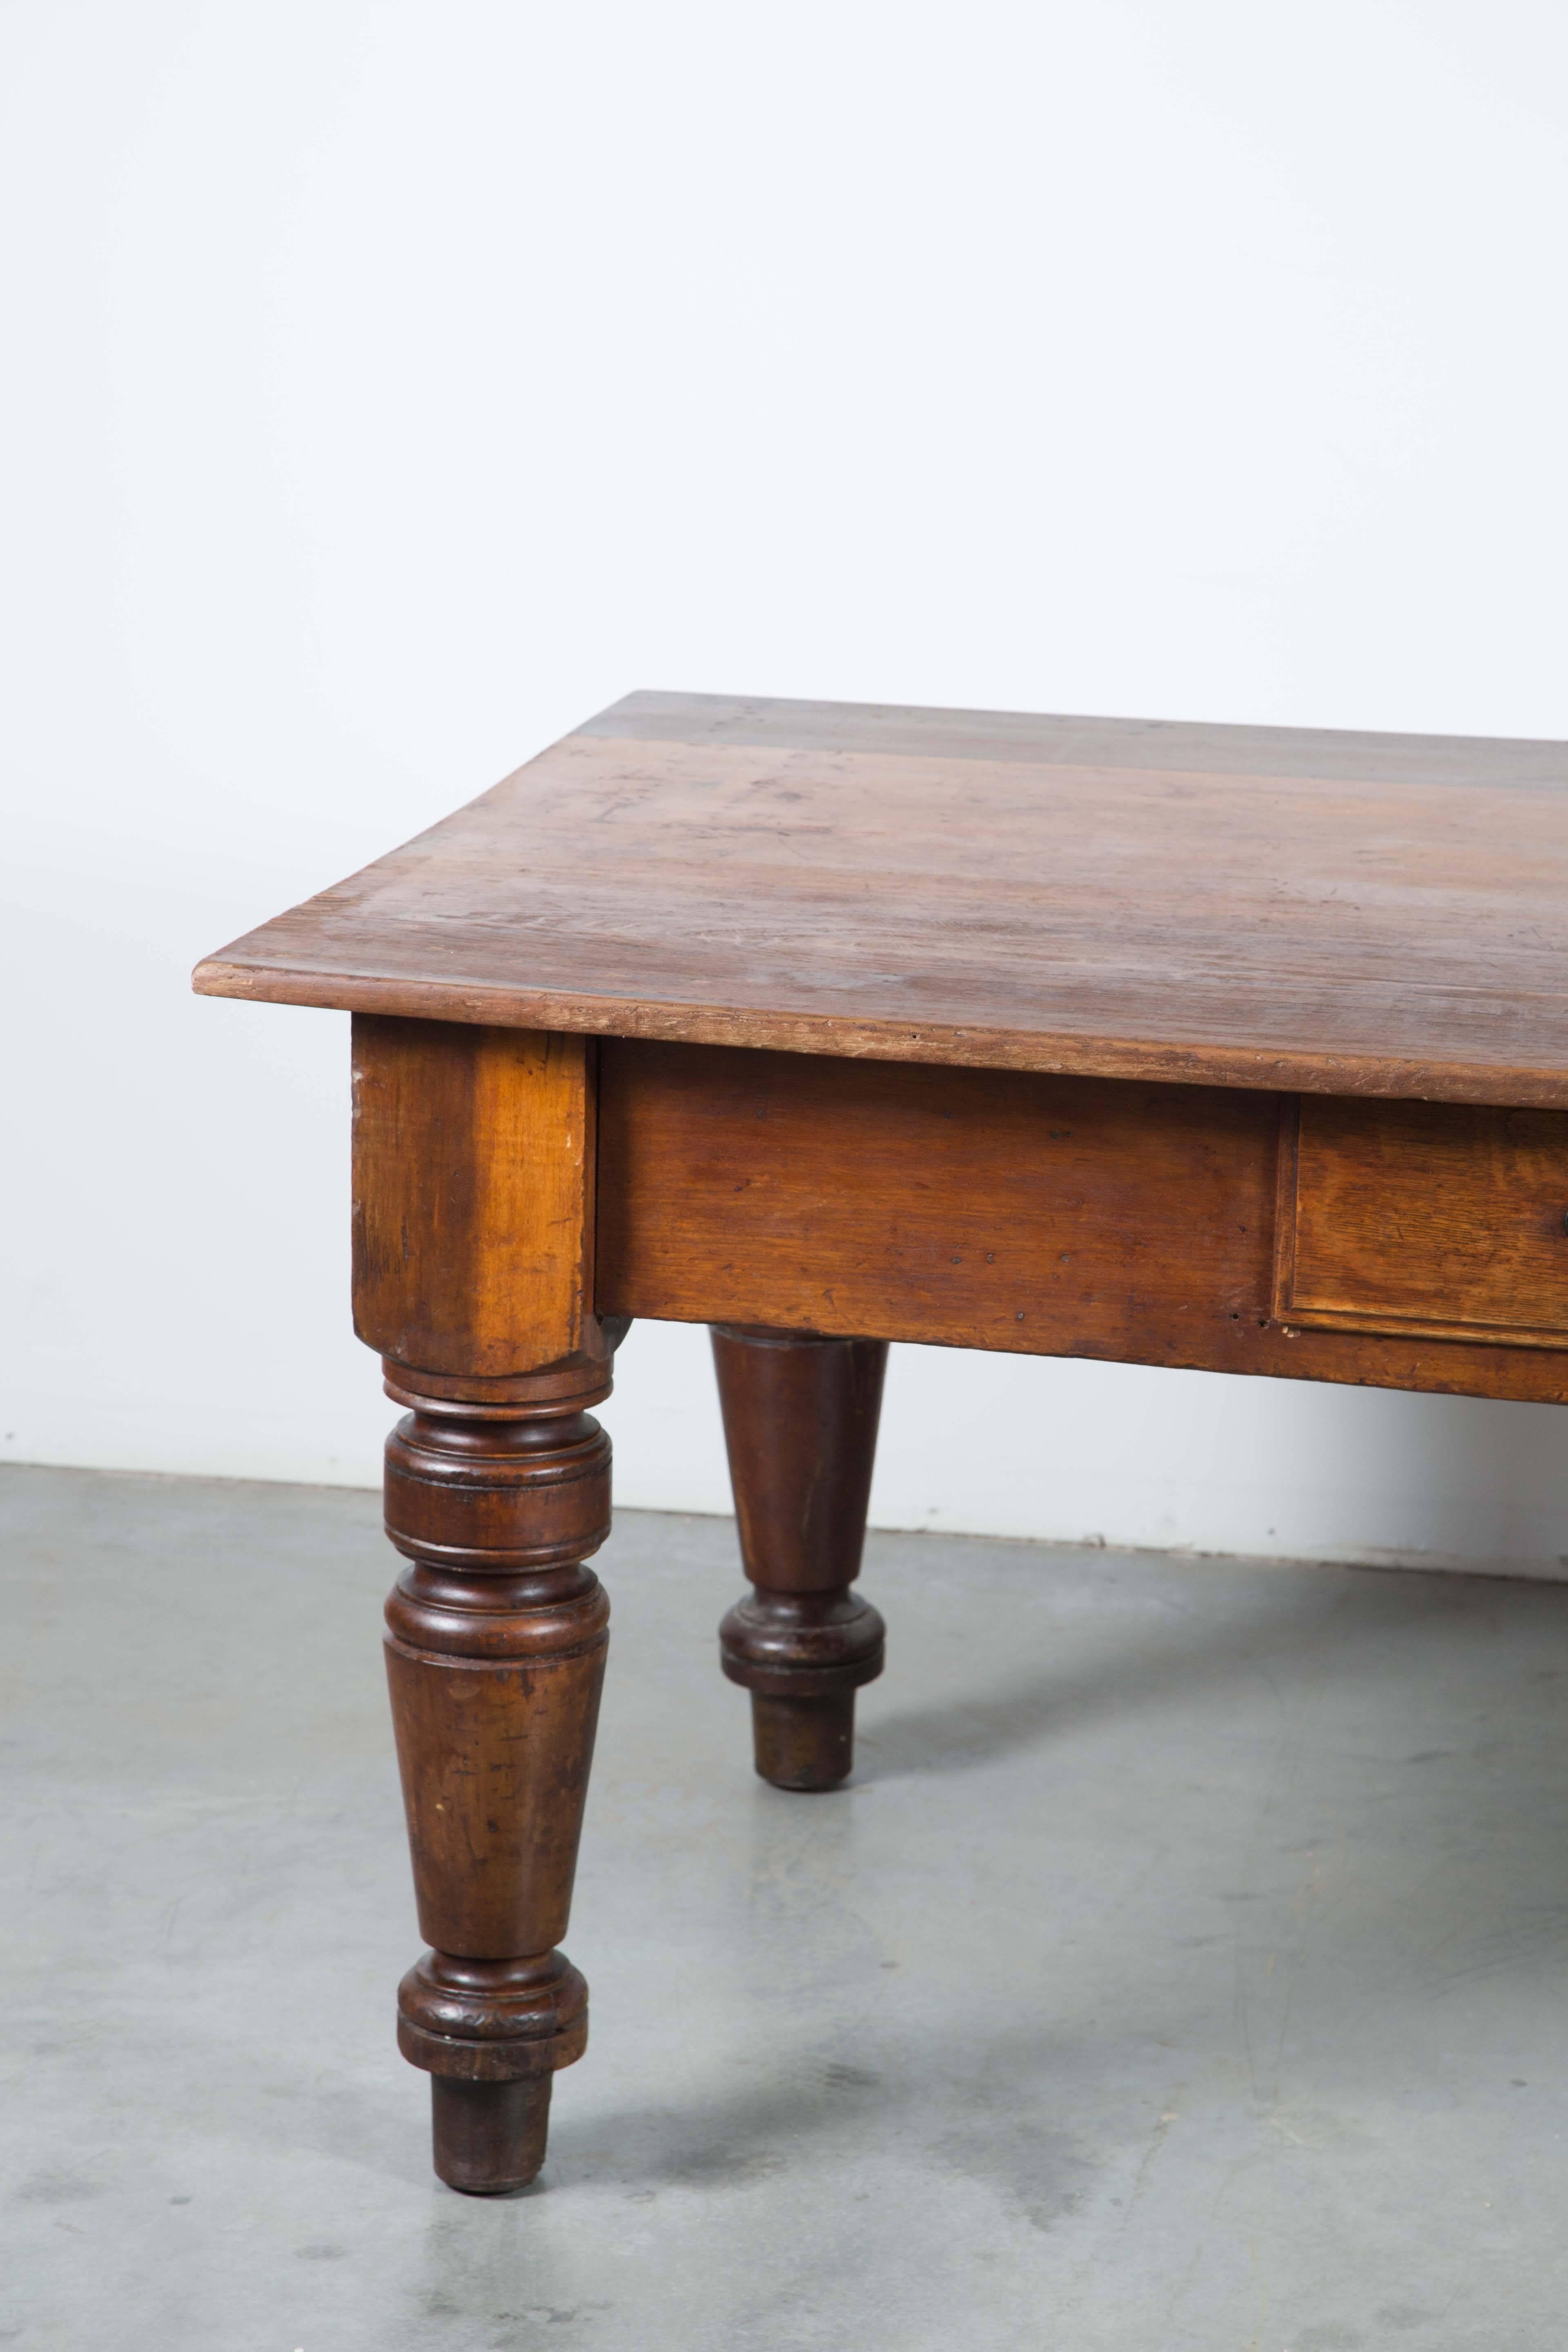 Late 19th century harvest table or store counter with fantastic chunky turned legs. Very solid and sturdy table with three large drawers.